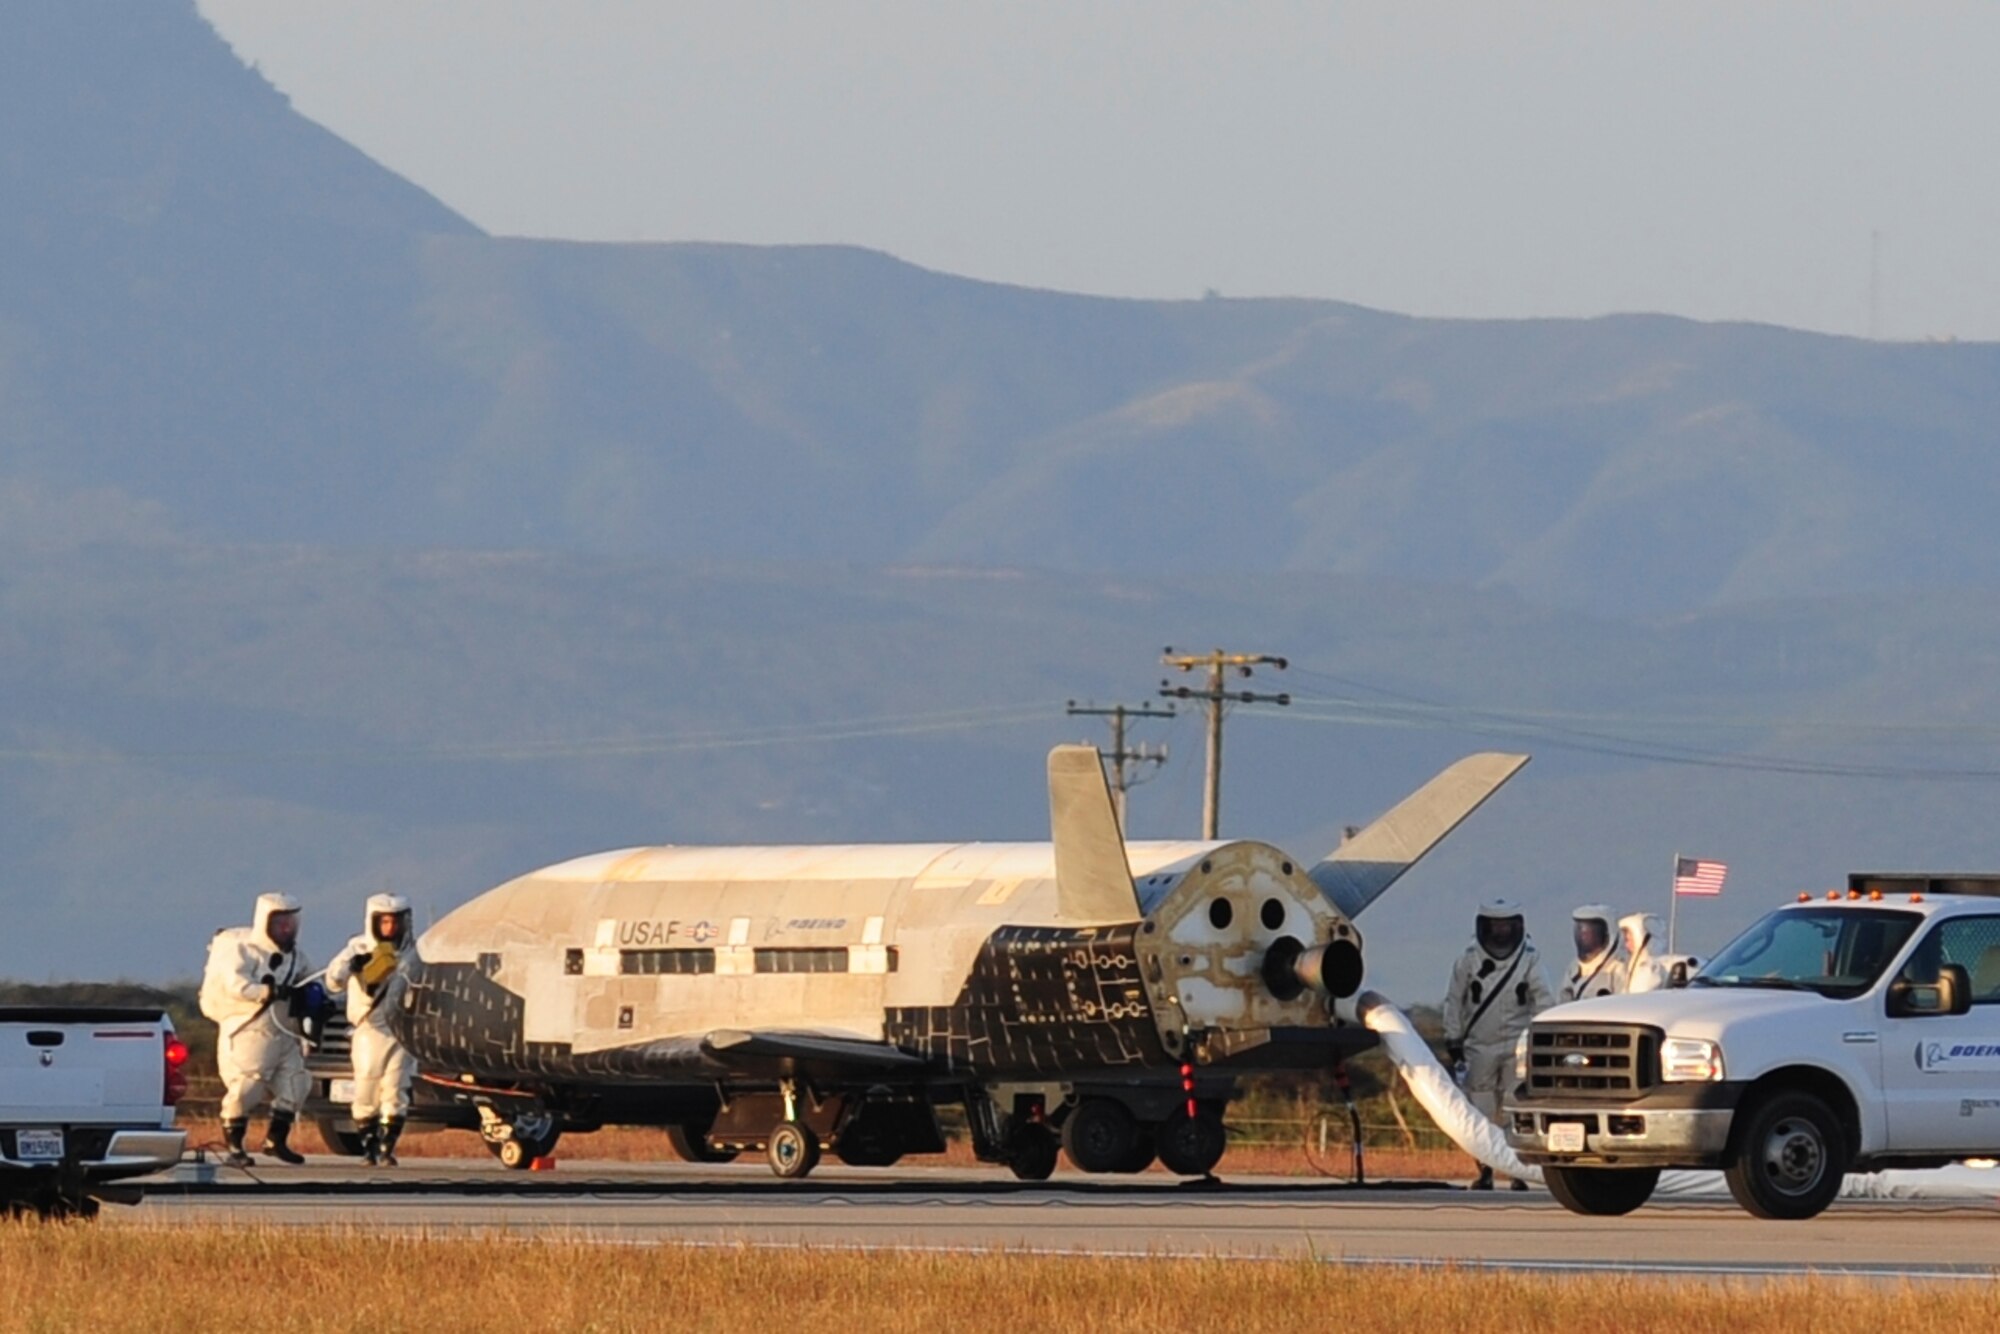 The X-37B Orbital Test Vehicle (OTV), the Air Force's unmanned, reusable space plane, landed at Vandenberg Air Force Base at 5:48 a.m. (PDT) June 16. OTV-2, which launched from Cape Canaveral Air Force Station, Fla., March 5, 2011, conducted on-orbit experiments for 469 days during its mission. The X-37B is the newest and most advanced re-entry spacecraft. Managed by the Air Force Rapid Capabilities Office, the X-37B program performs risk reduction, experimentation and concept of operations development for reusable space vehicle technologies. (photo credit: Boeing)